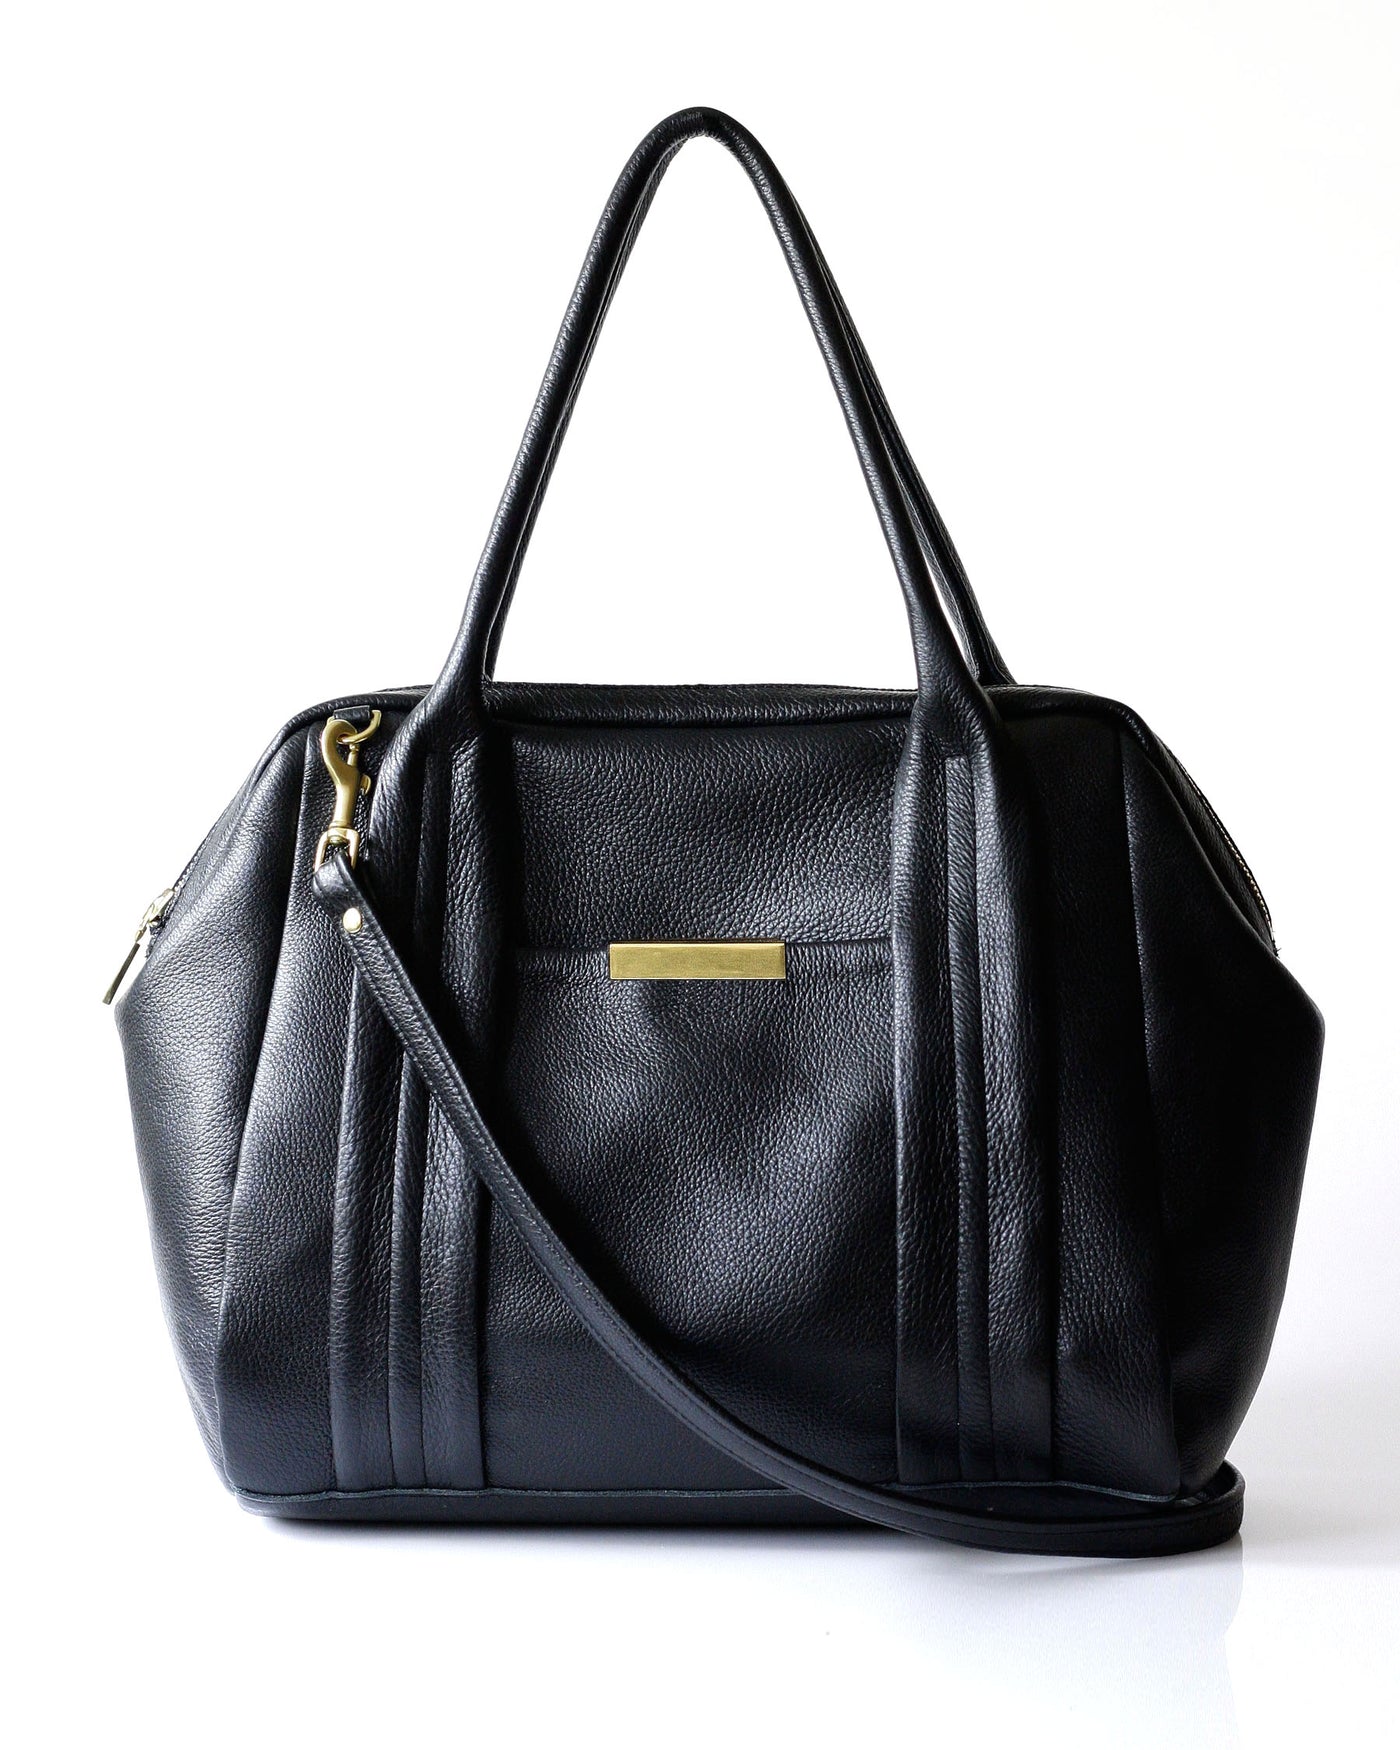 Liria Duffle - Opelle bag Permanent Collection - Opelle leather handbag handcrafted leather bag toronto Canada